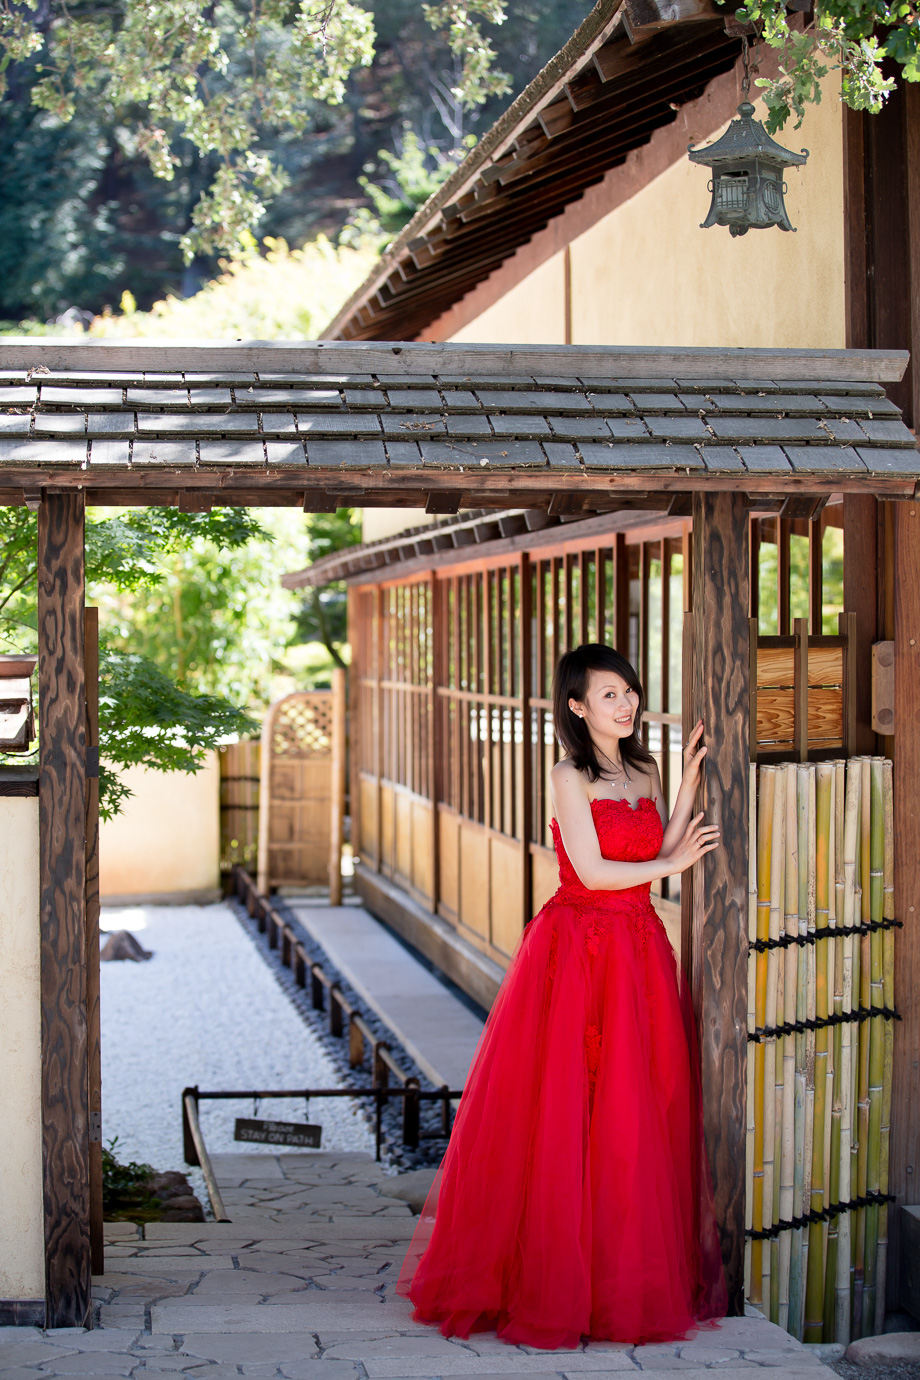 Renee in a sharp red dress leaning on a Japanese-style doorway at Hakone Gardens